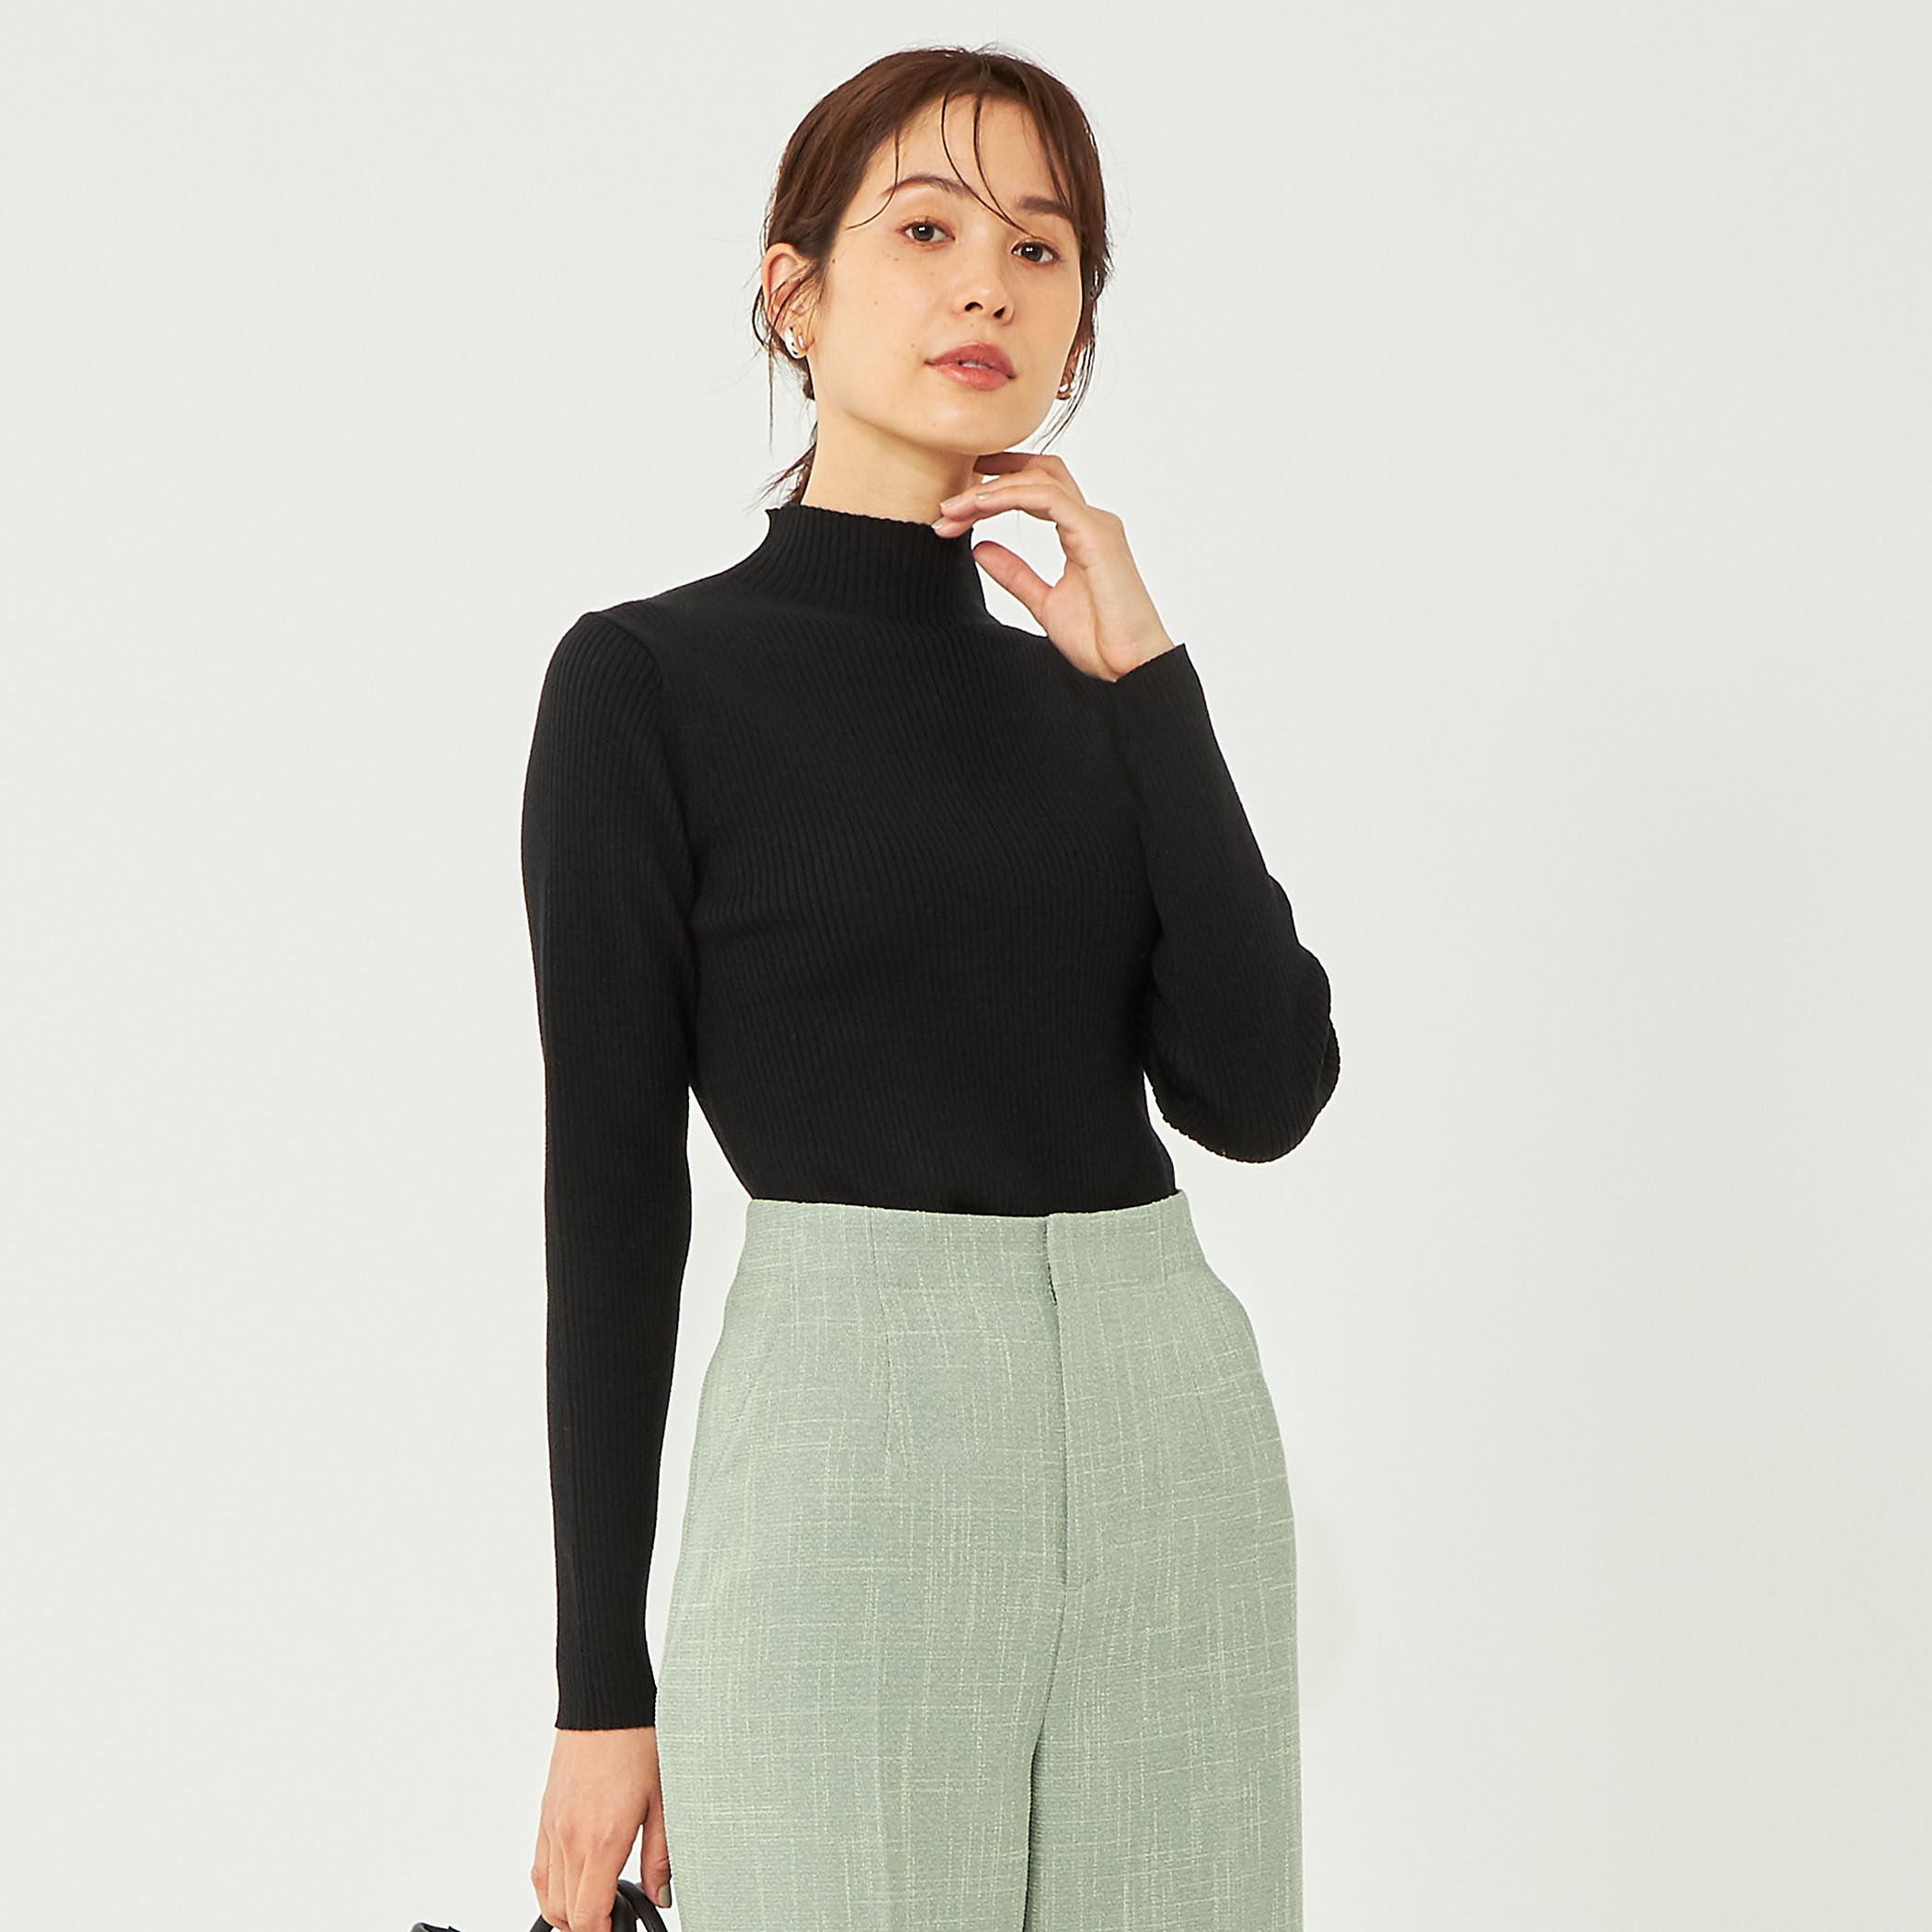 UNITED ARROWS green label relaxing
【矢野未希子さん着用】リブ ボトルネック ニット -ウォッシャブル-
￥9,900